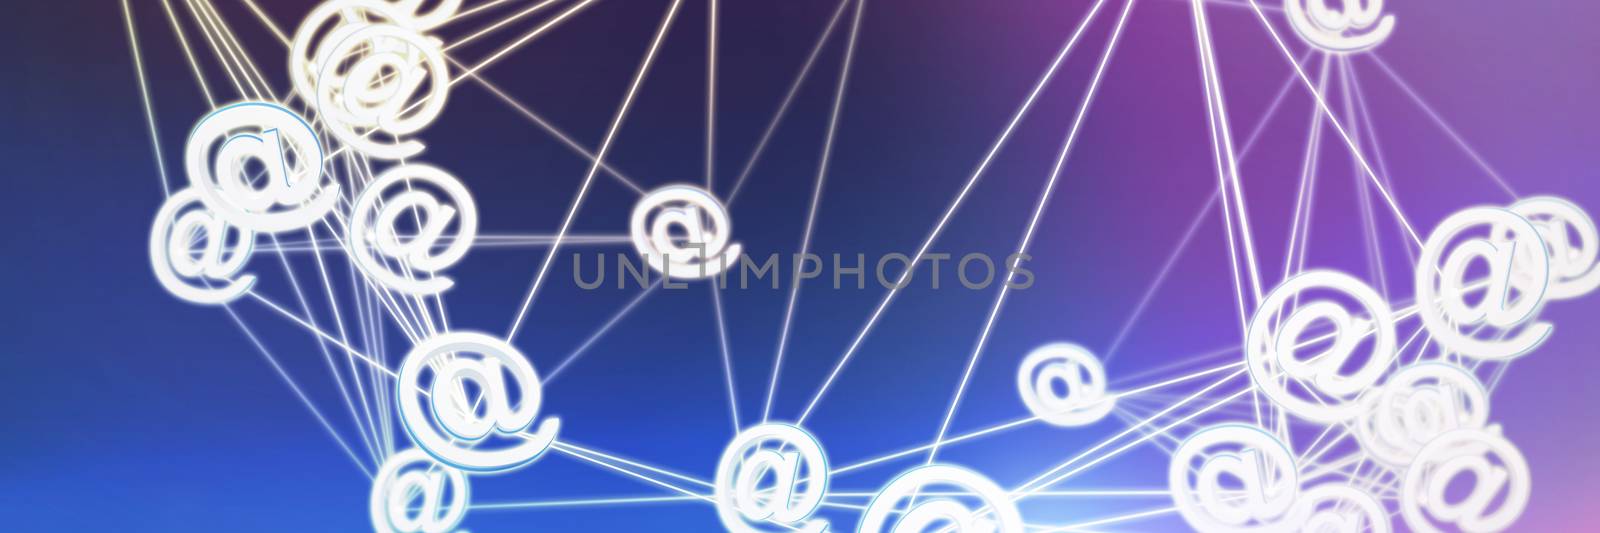 Abstract image of at email sign against abstract blue background